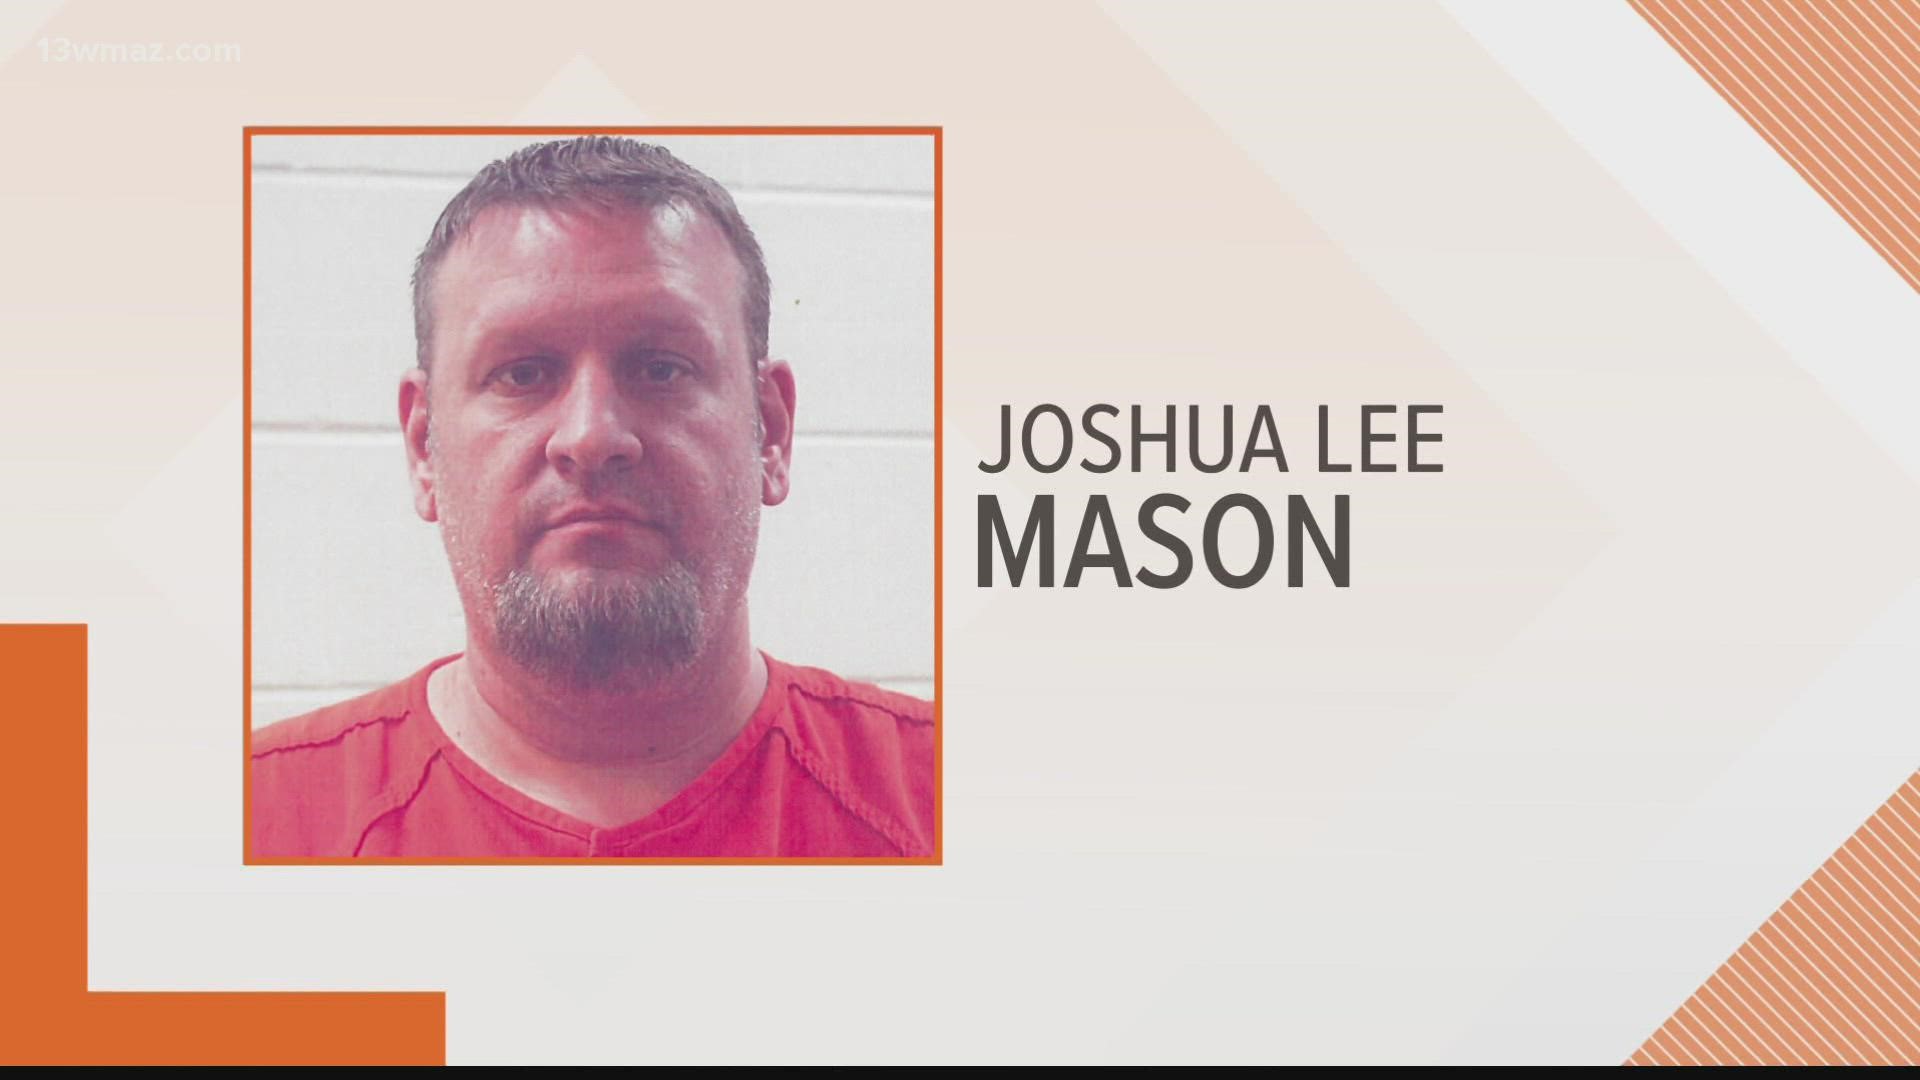 The school district says he resigned Thursday, and then he turned himself in to investigators the following day.